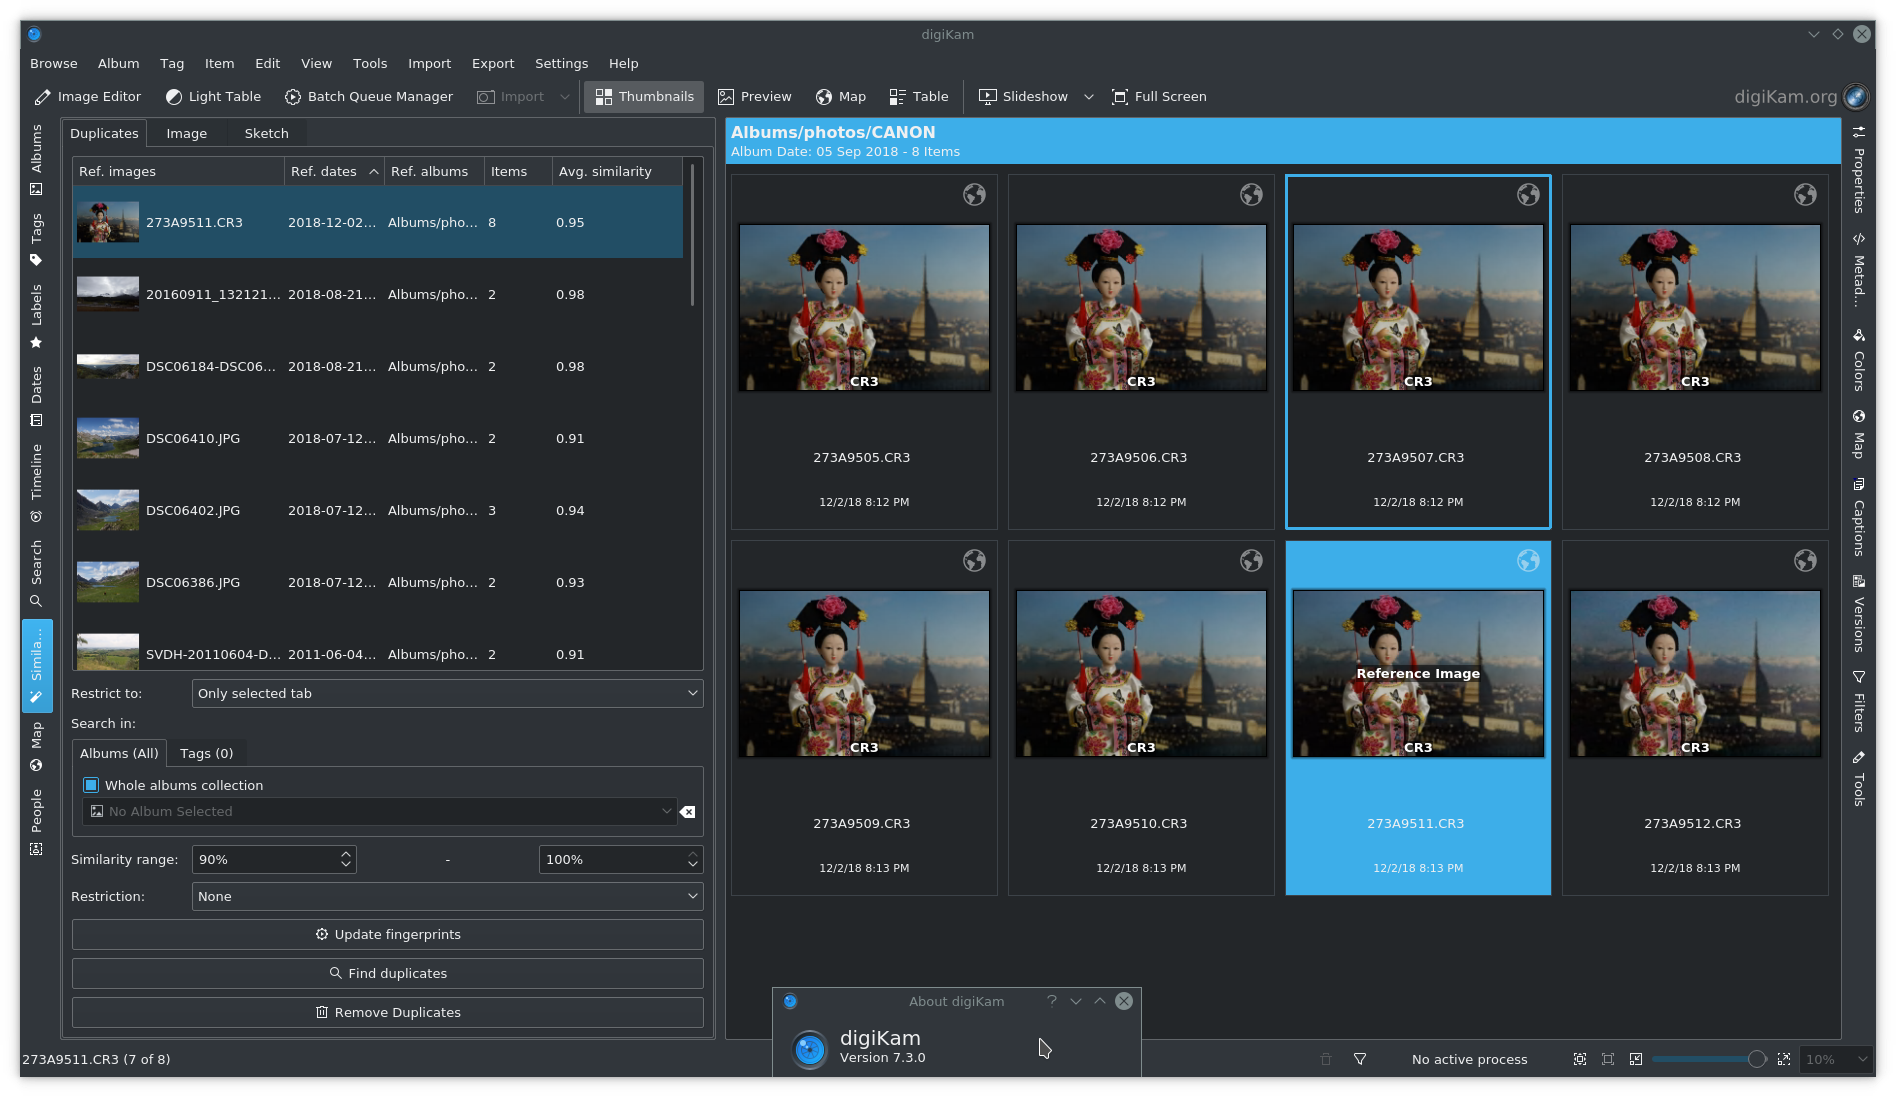 digiKam 7.3 Open-Source Photo Management App Released with ExifTool Support, More